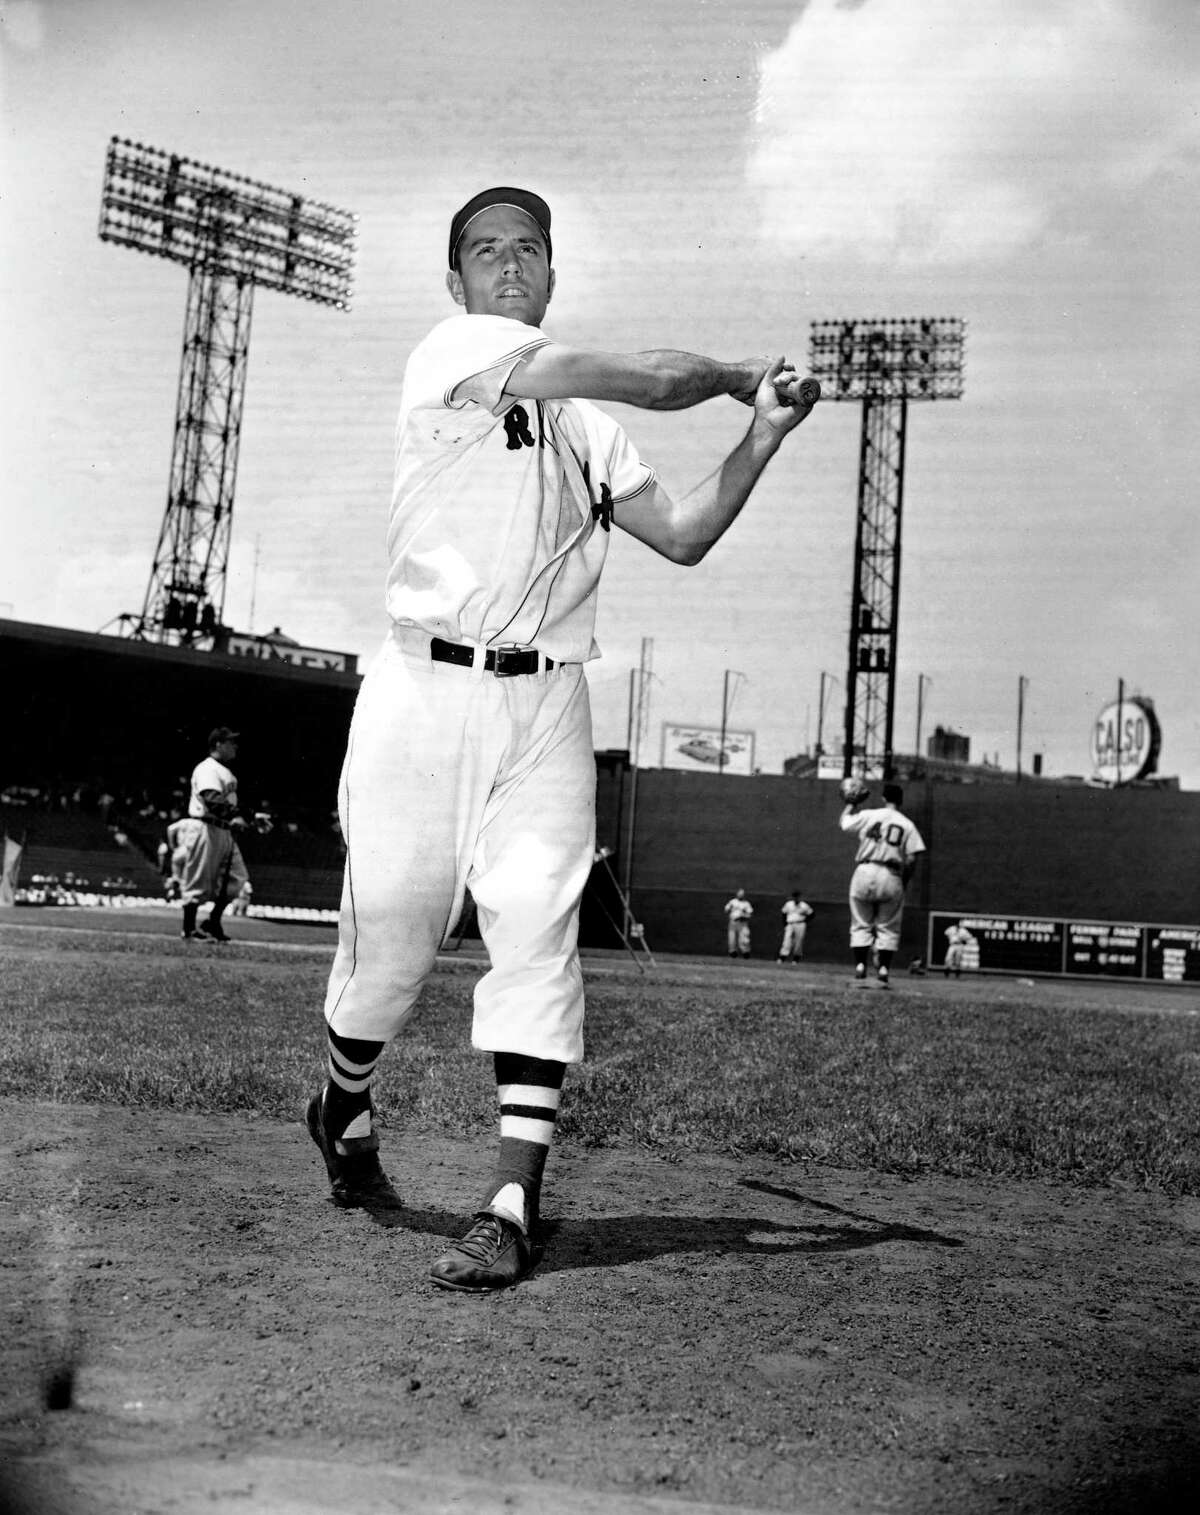 In this June 4, 1952 photo, Jim Piersall of the Boston Red Sox poses at Fenway Park in Boston, Ma., before a game against the Cleveland Indians. Piersall, who bared his soul about his struggles with mental illness in his book ‘Fear Strikes Out,’ has died. The Boston Red Sox, for whom Piersall played for seven of his 17 seasons in the majors, said Piersall died Saturday, June 3, 2017 at a care facility in Wheaton, Ill. after a monthslong illness.